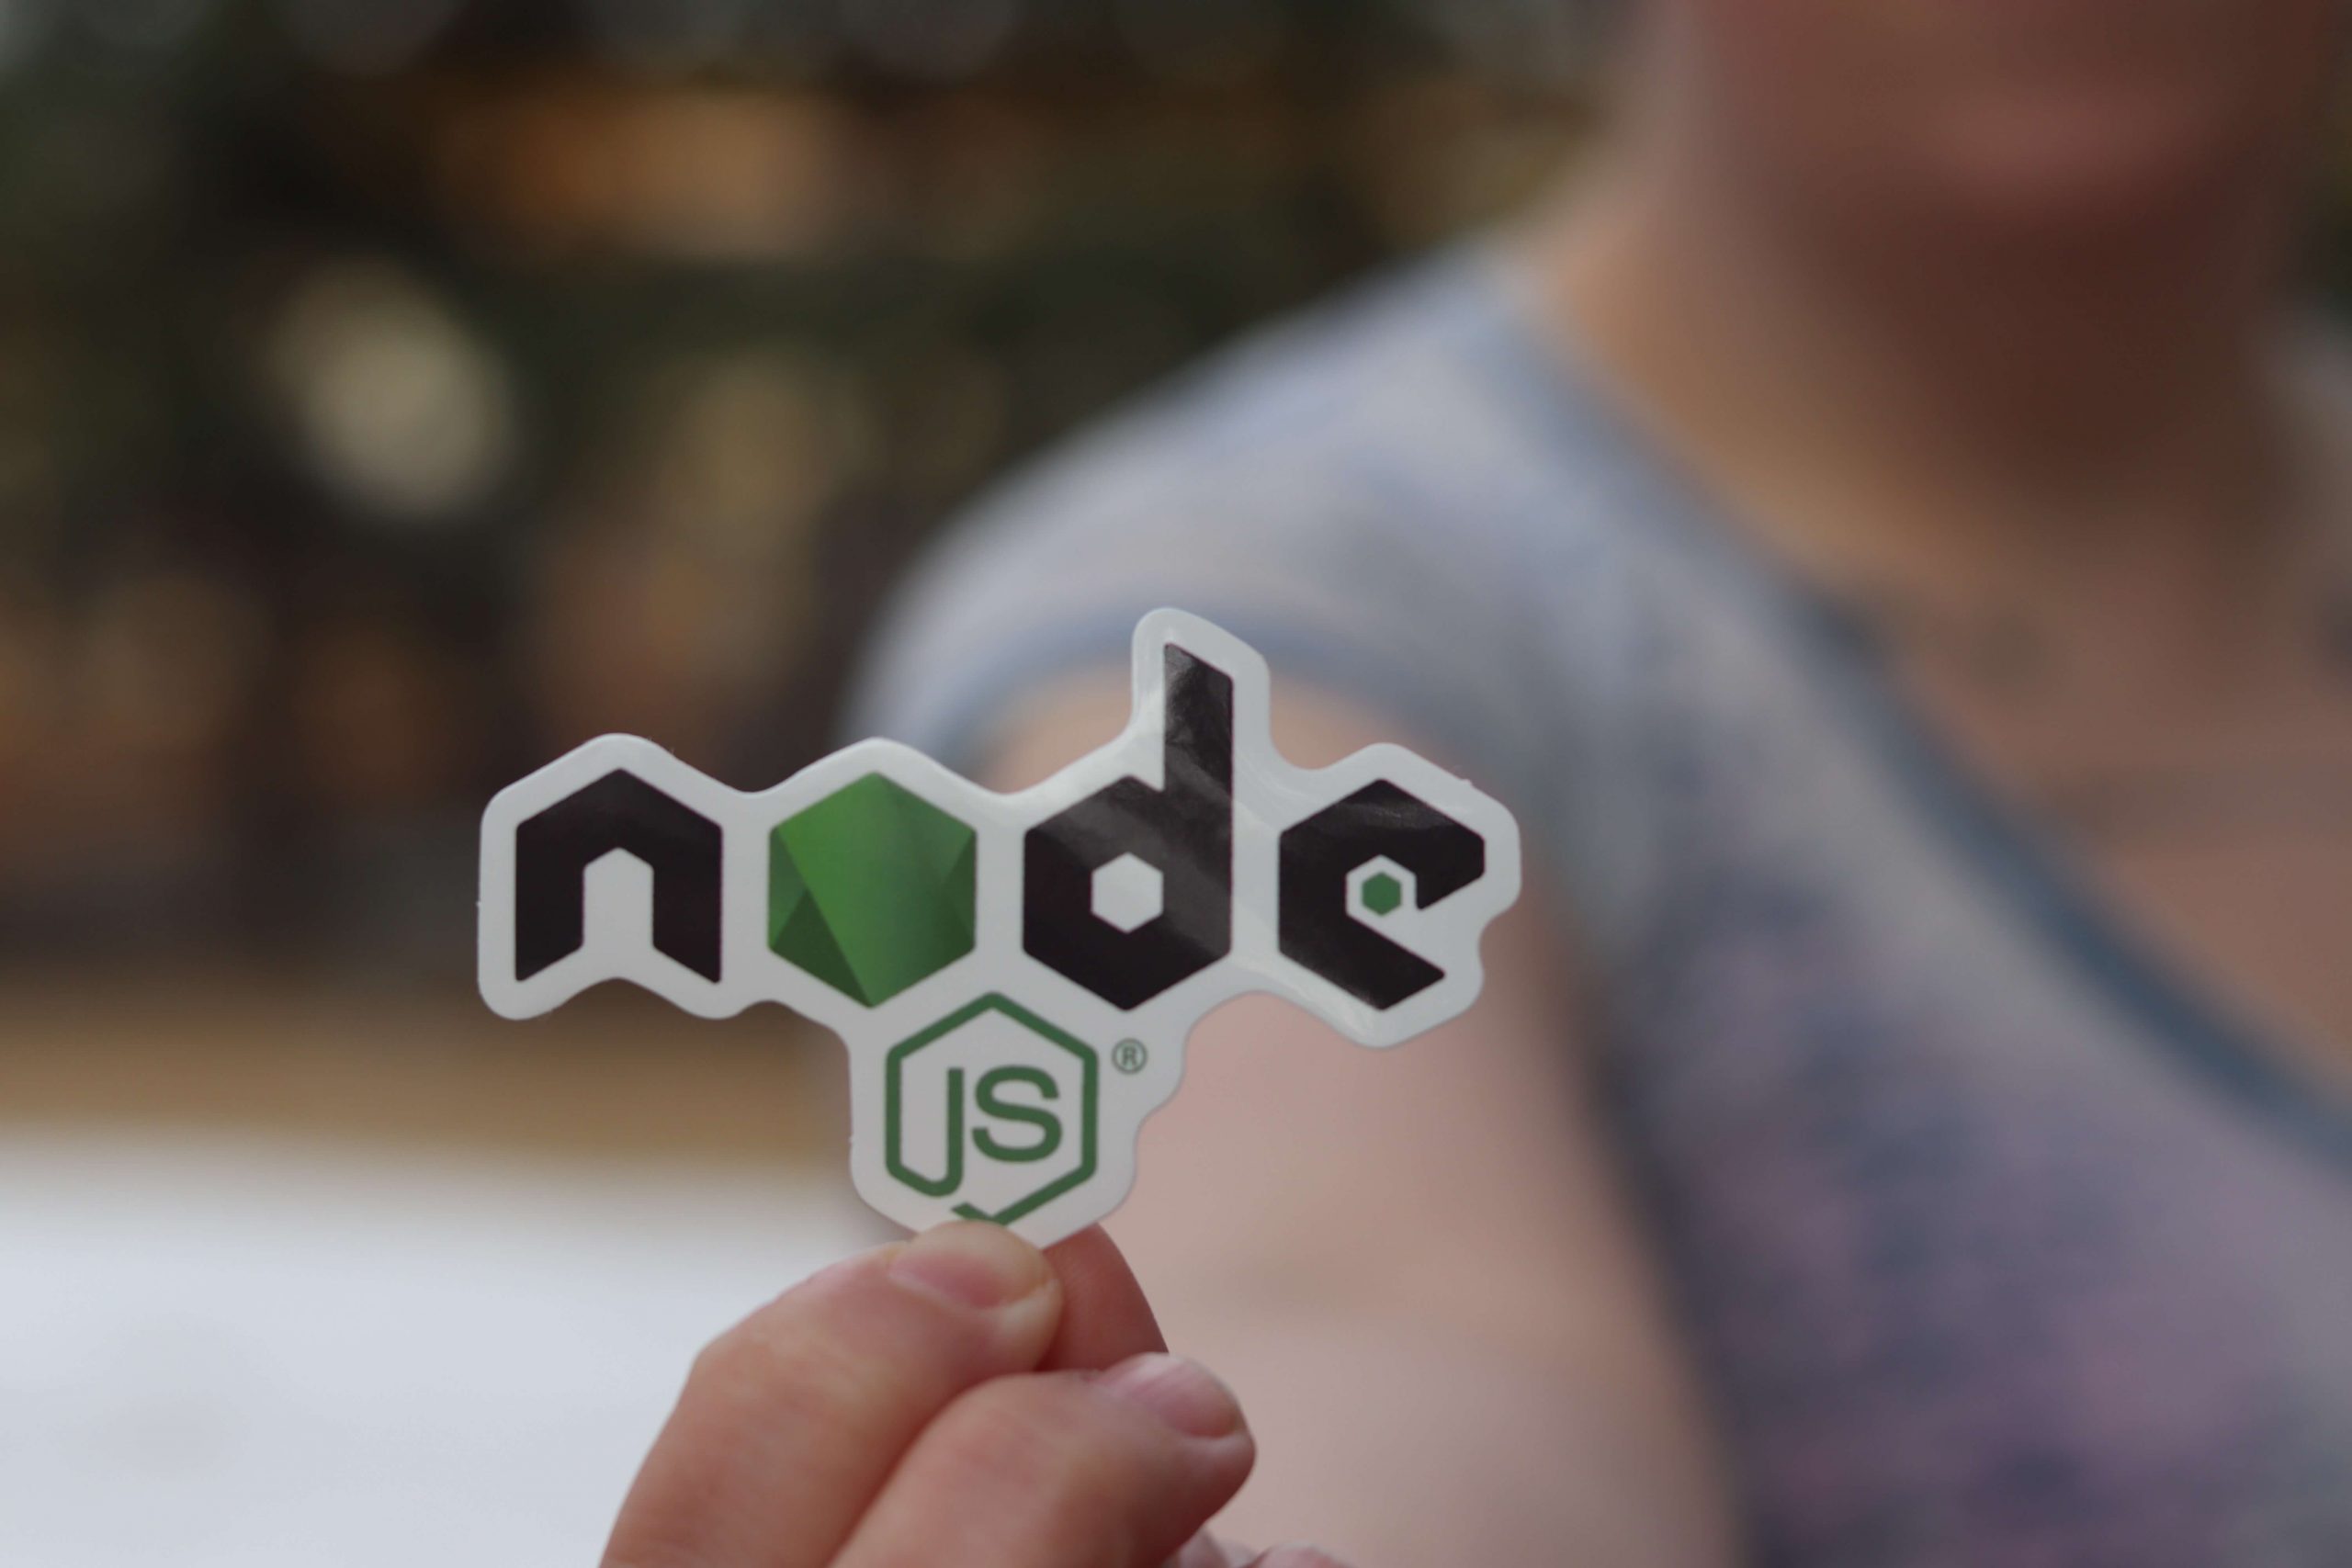 Why chose Node JS as the backend?